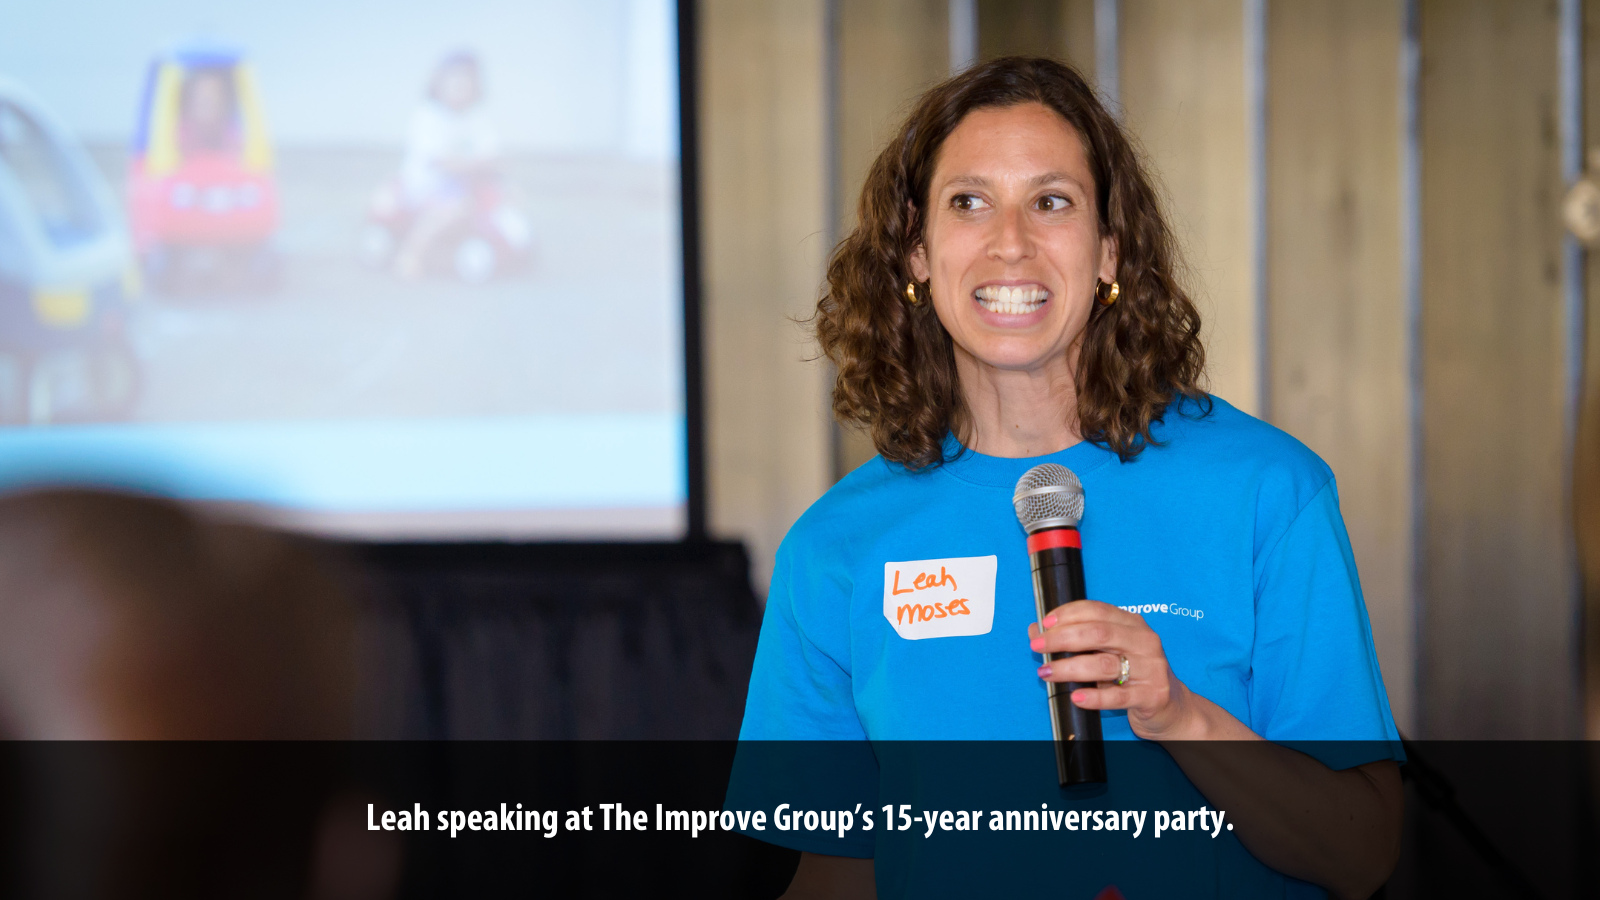 Leah speaking at The Improve Group’s 15-year anniversary party.